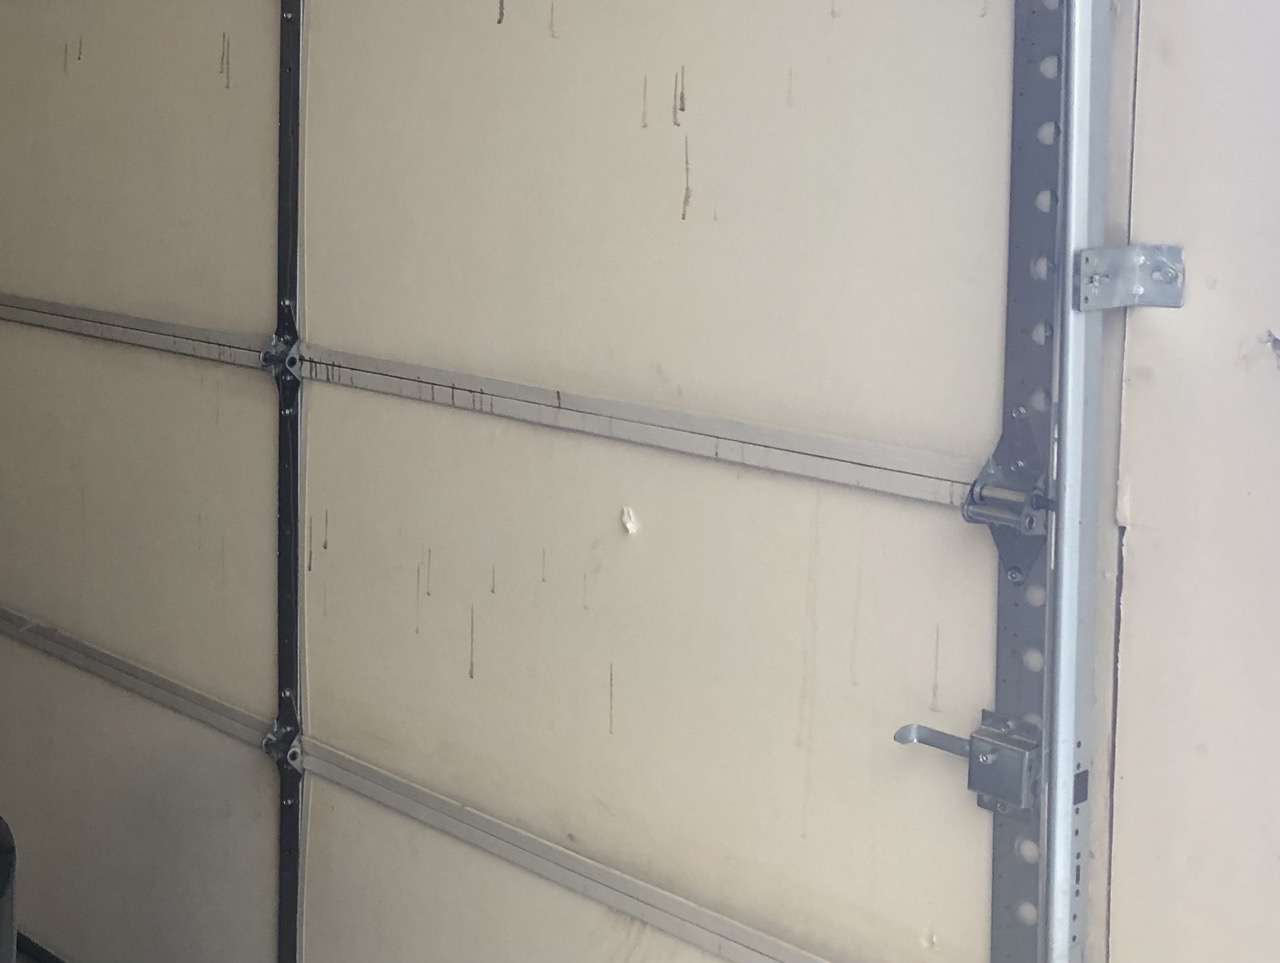 Vinyl back insulated garage door with punctures and knicks in the insulation. We have seen doors far worse than this.